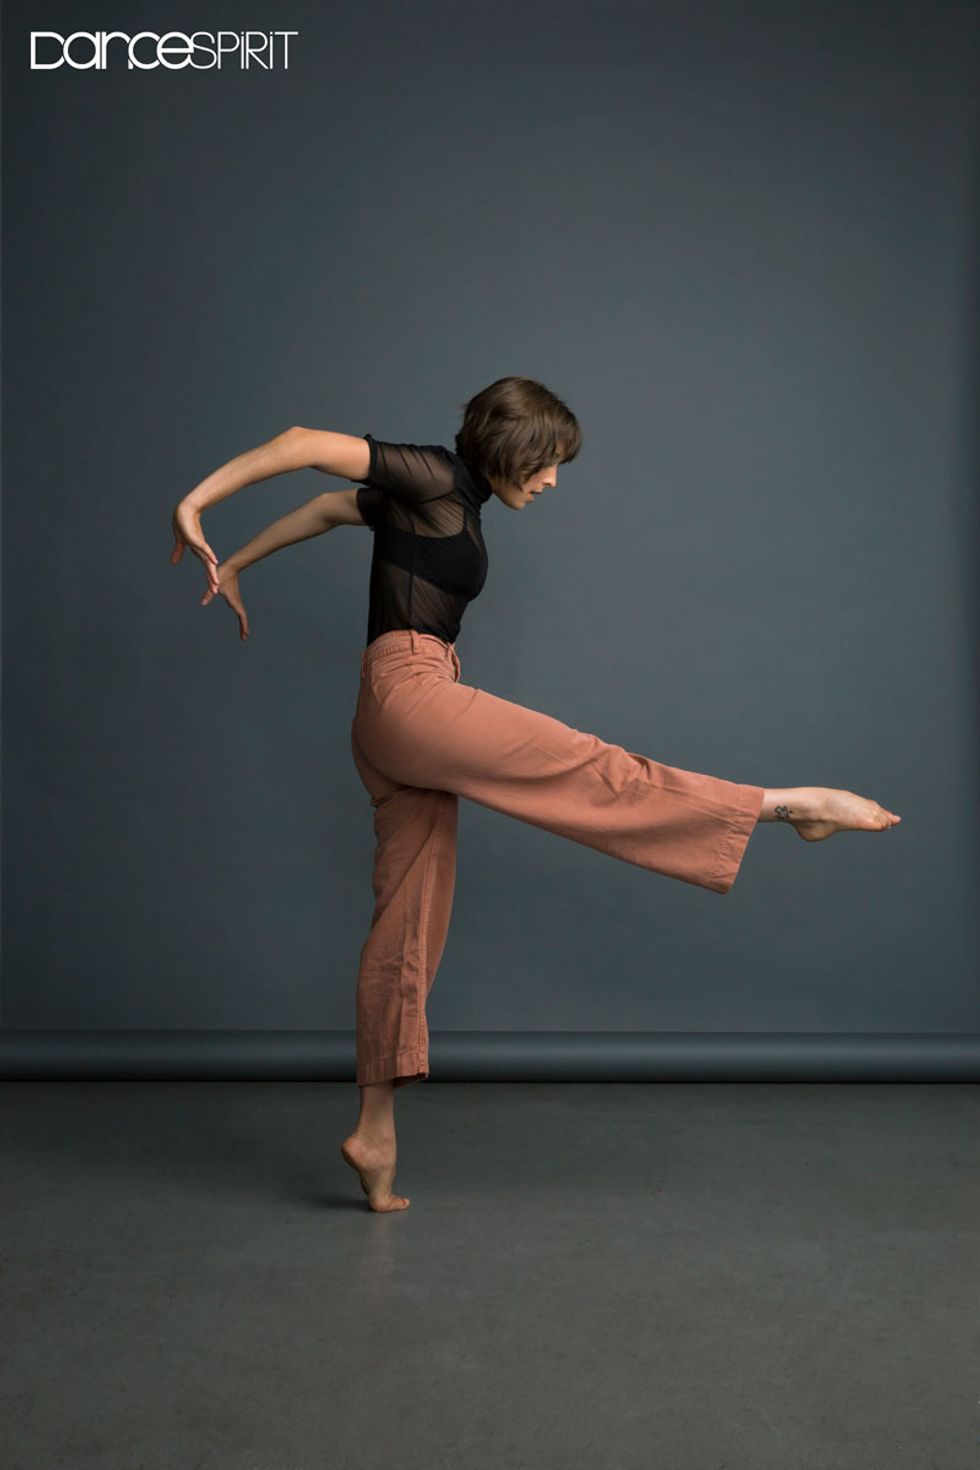 Gianna Reisen - a young woman with brown hair in a bob - poses with her arms outstretched behind her, as if pushing against an invisible wall, and her right foot outstretched in front of her.